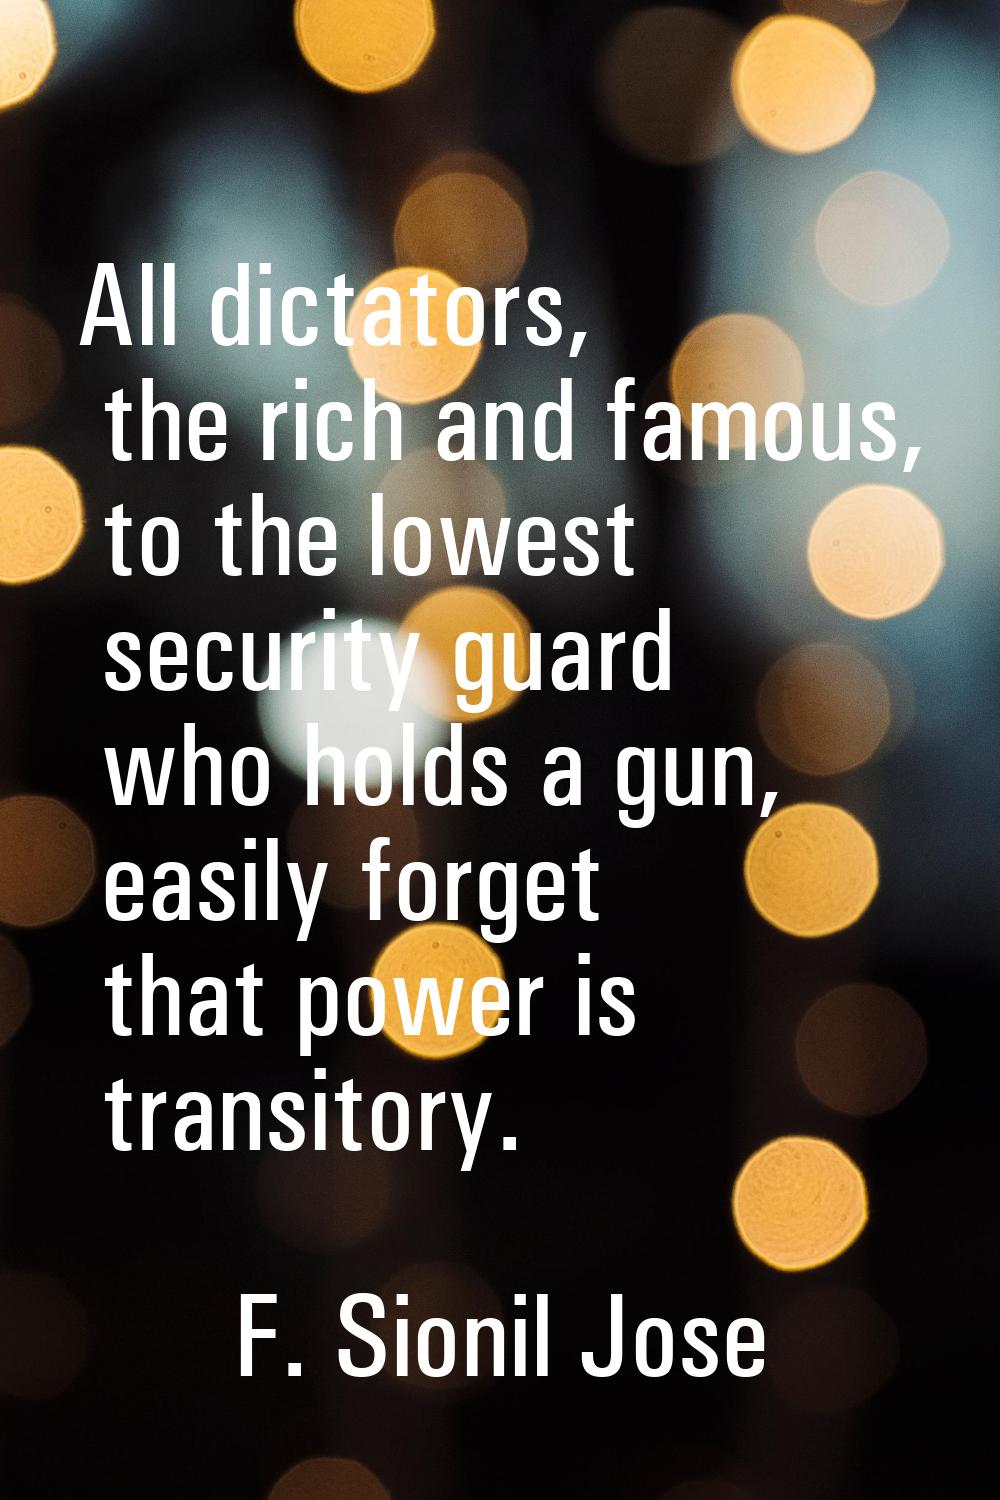 All dictators, the rich and famous, to the lowest security guard who holds a gun, easily forget tha